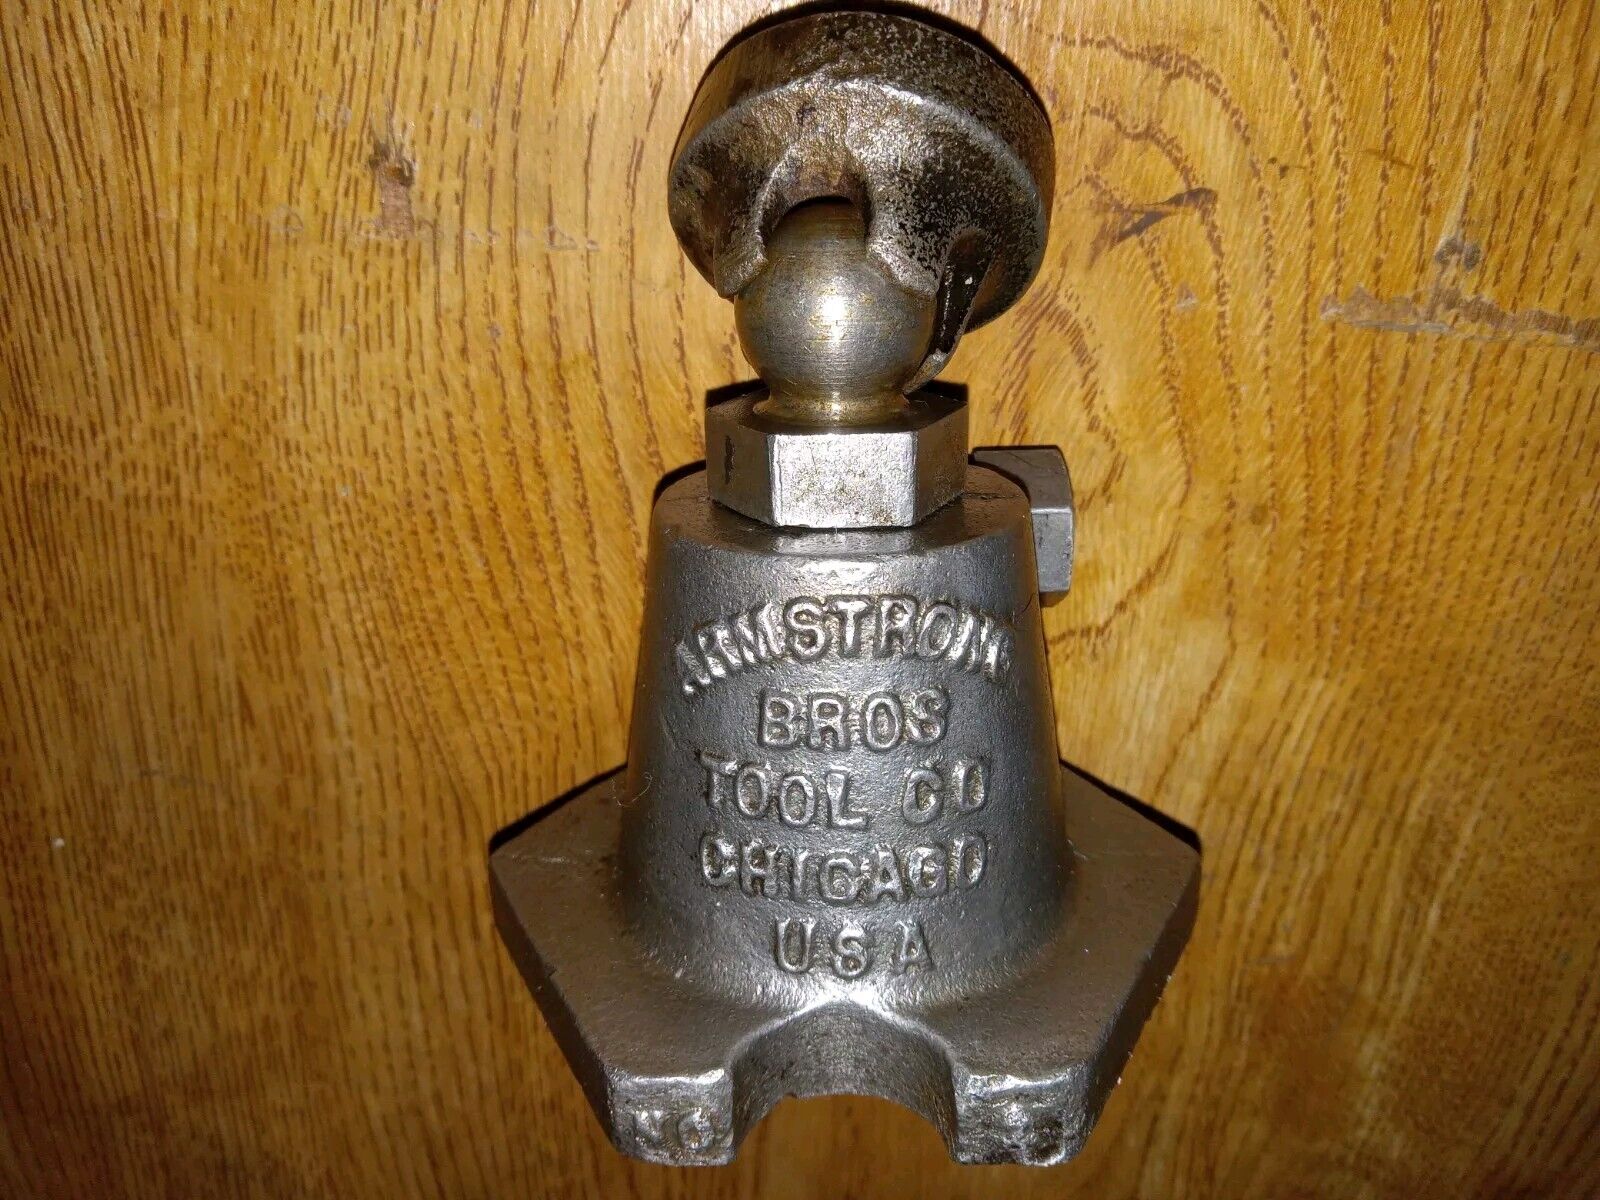 Vintage Armstrong Bros Tool Co machinist leveling screw jack collectible